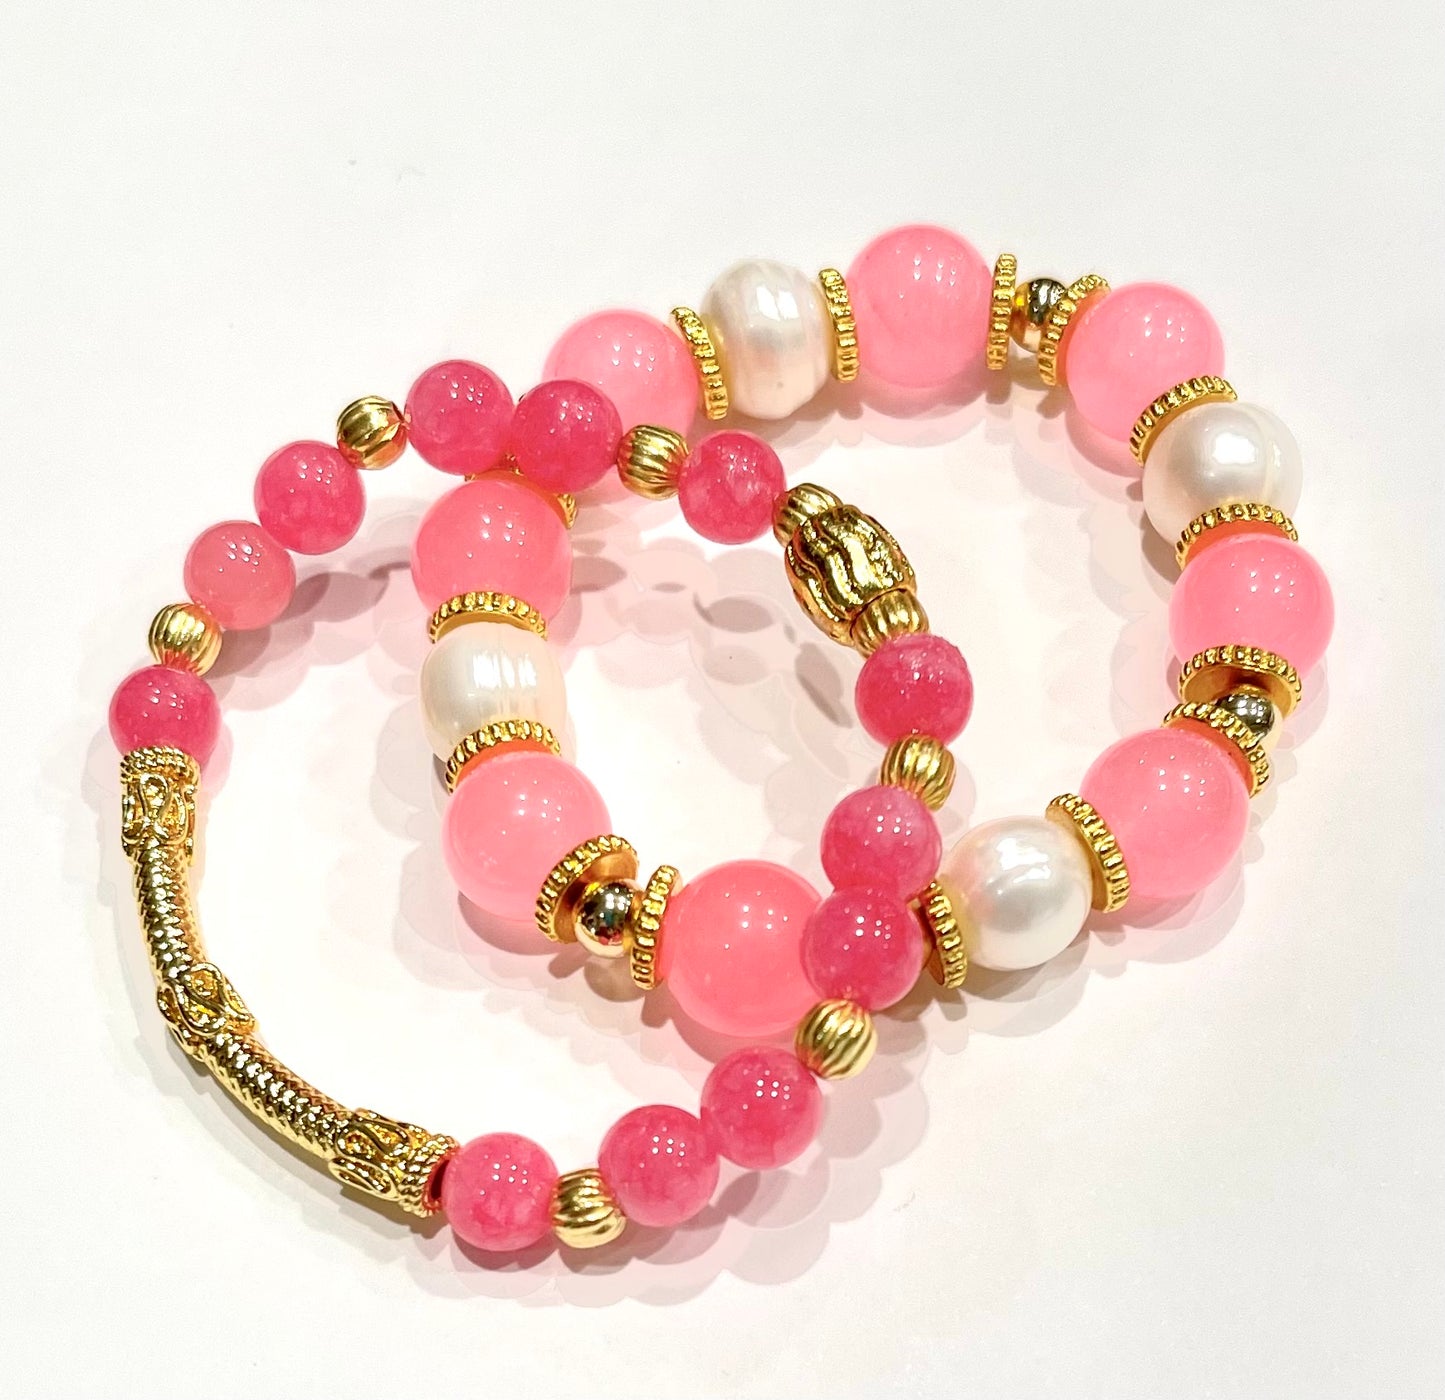 Pink Freshwater Pearl Beads Strand – Estate Beads & Jewelry